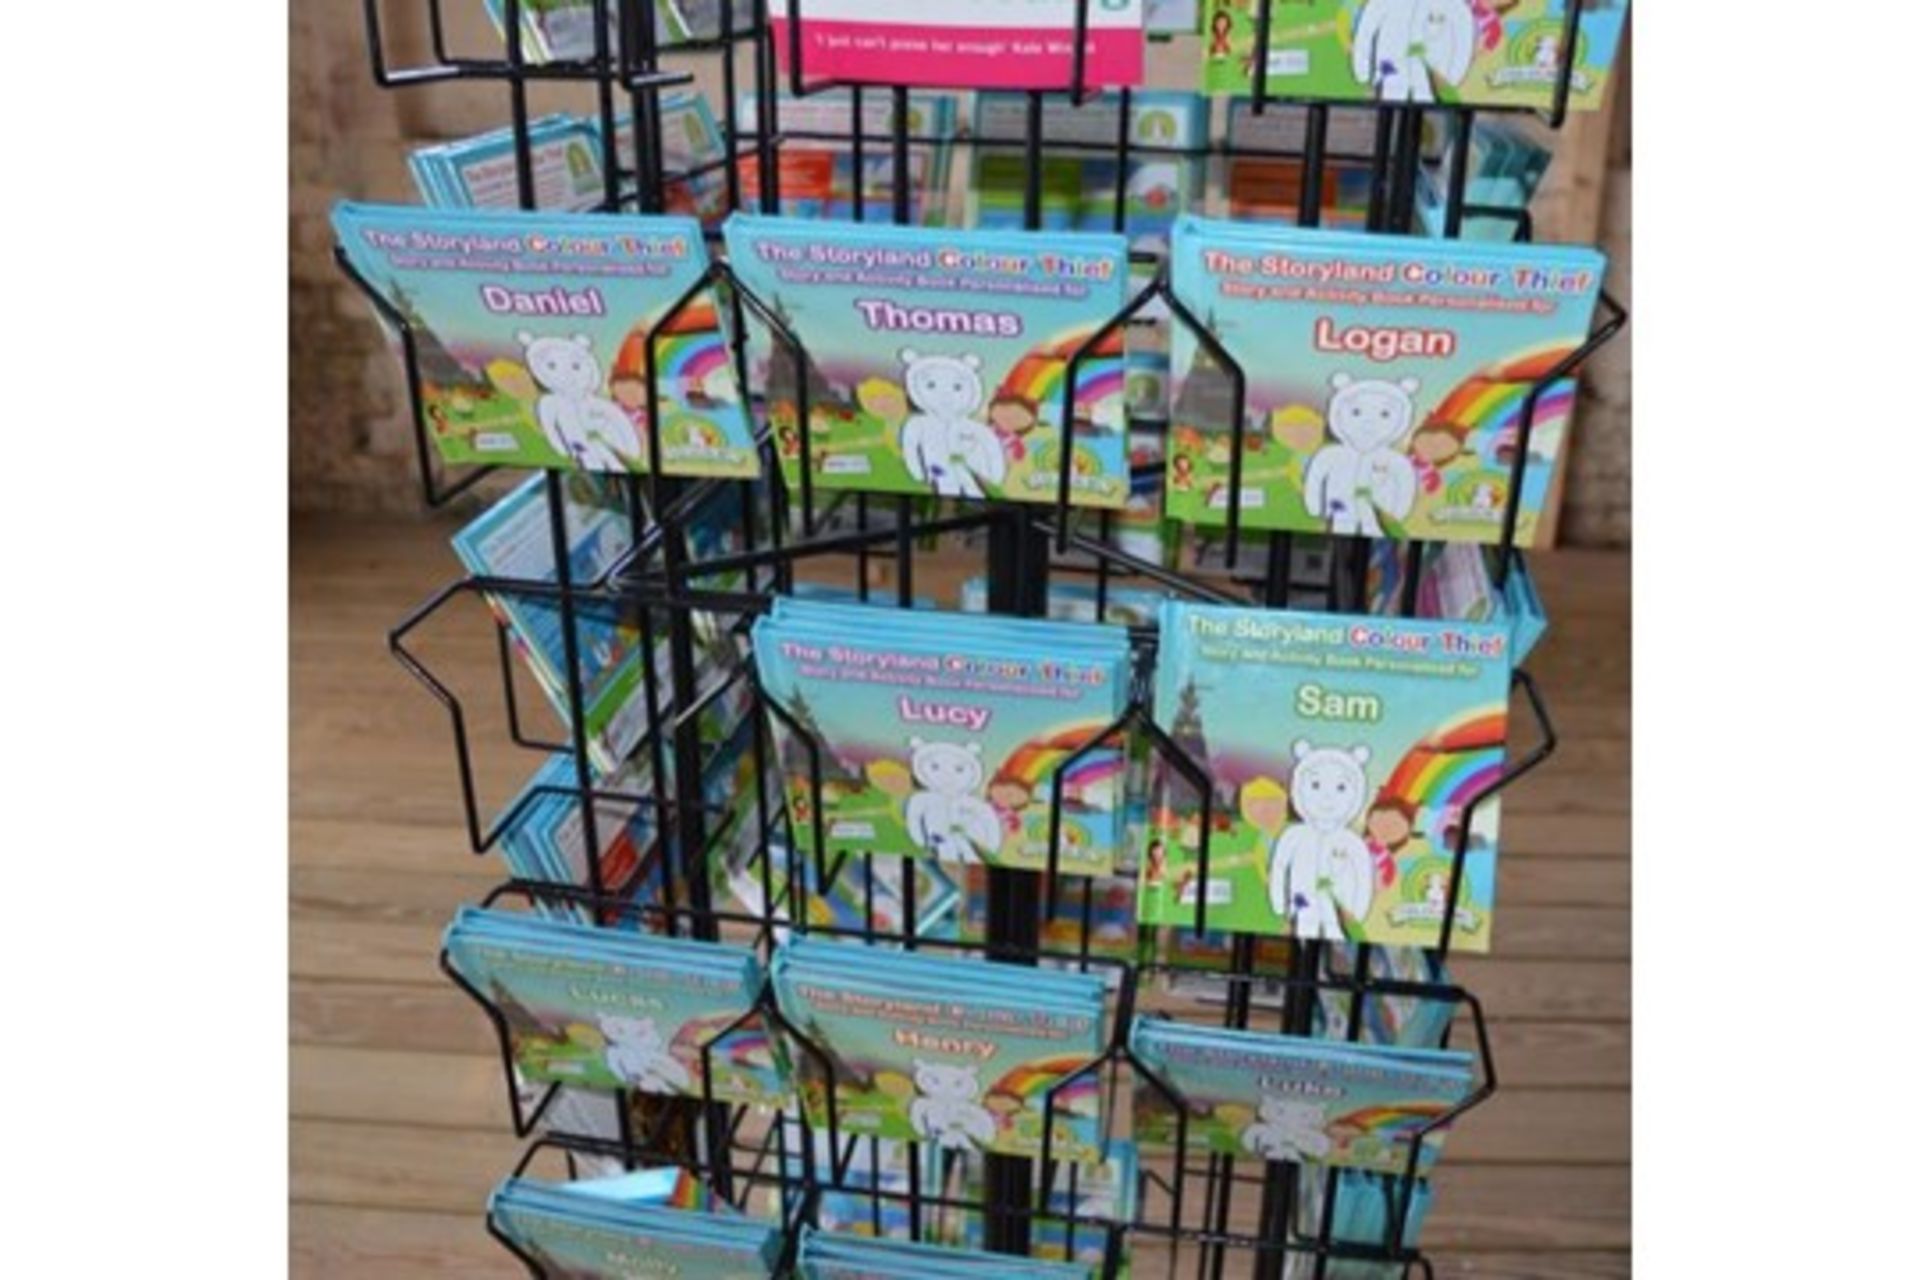 27 x Retail Carousel Display Stands With Approximately 2,800 Items of Resale Stock - Includes - Image 16 of 61